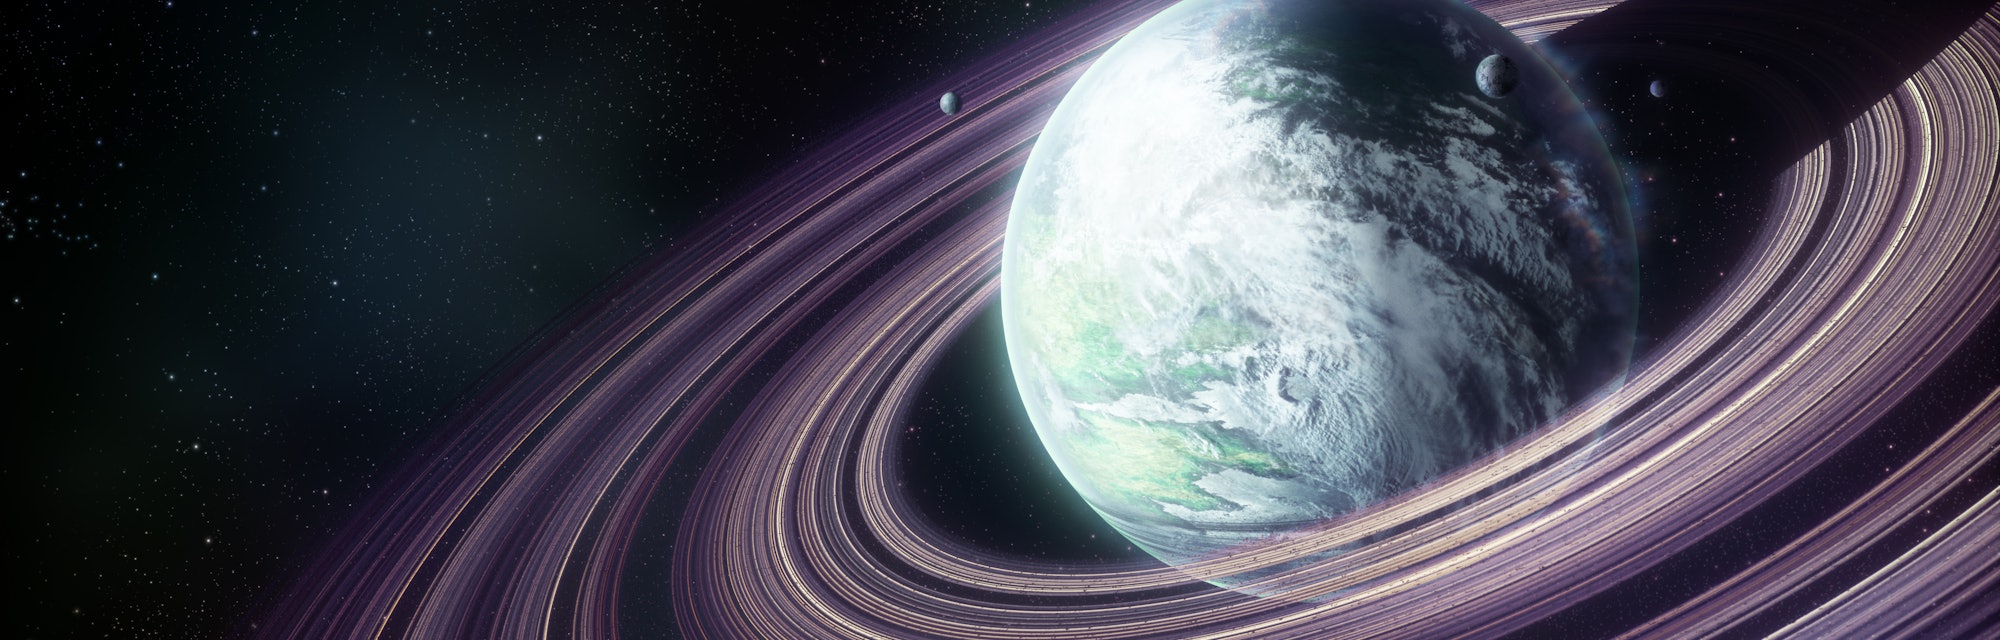 Digital painting of a planet with rings and small moons